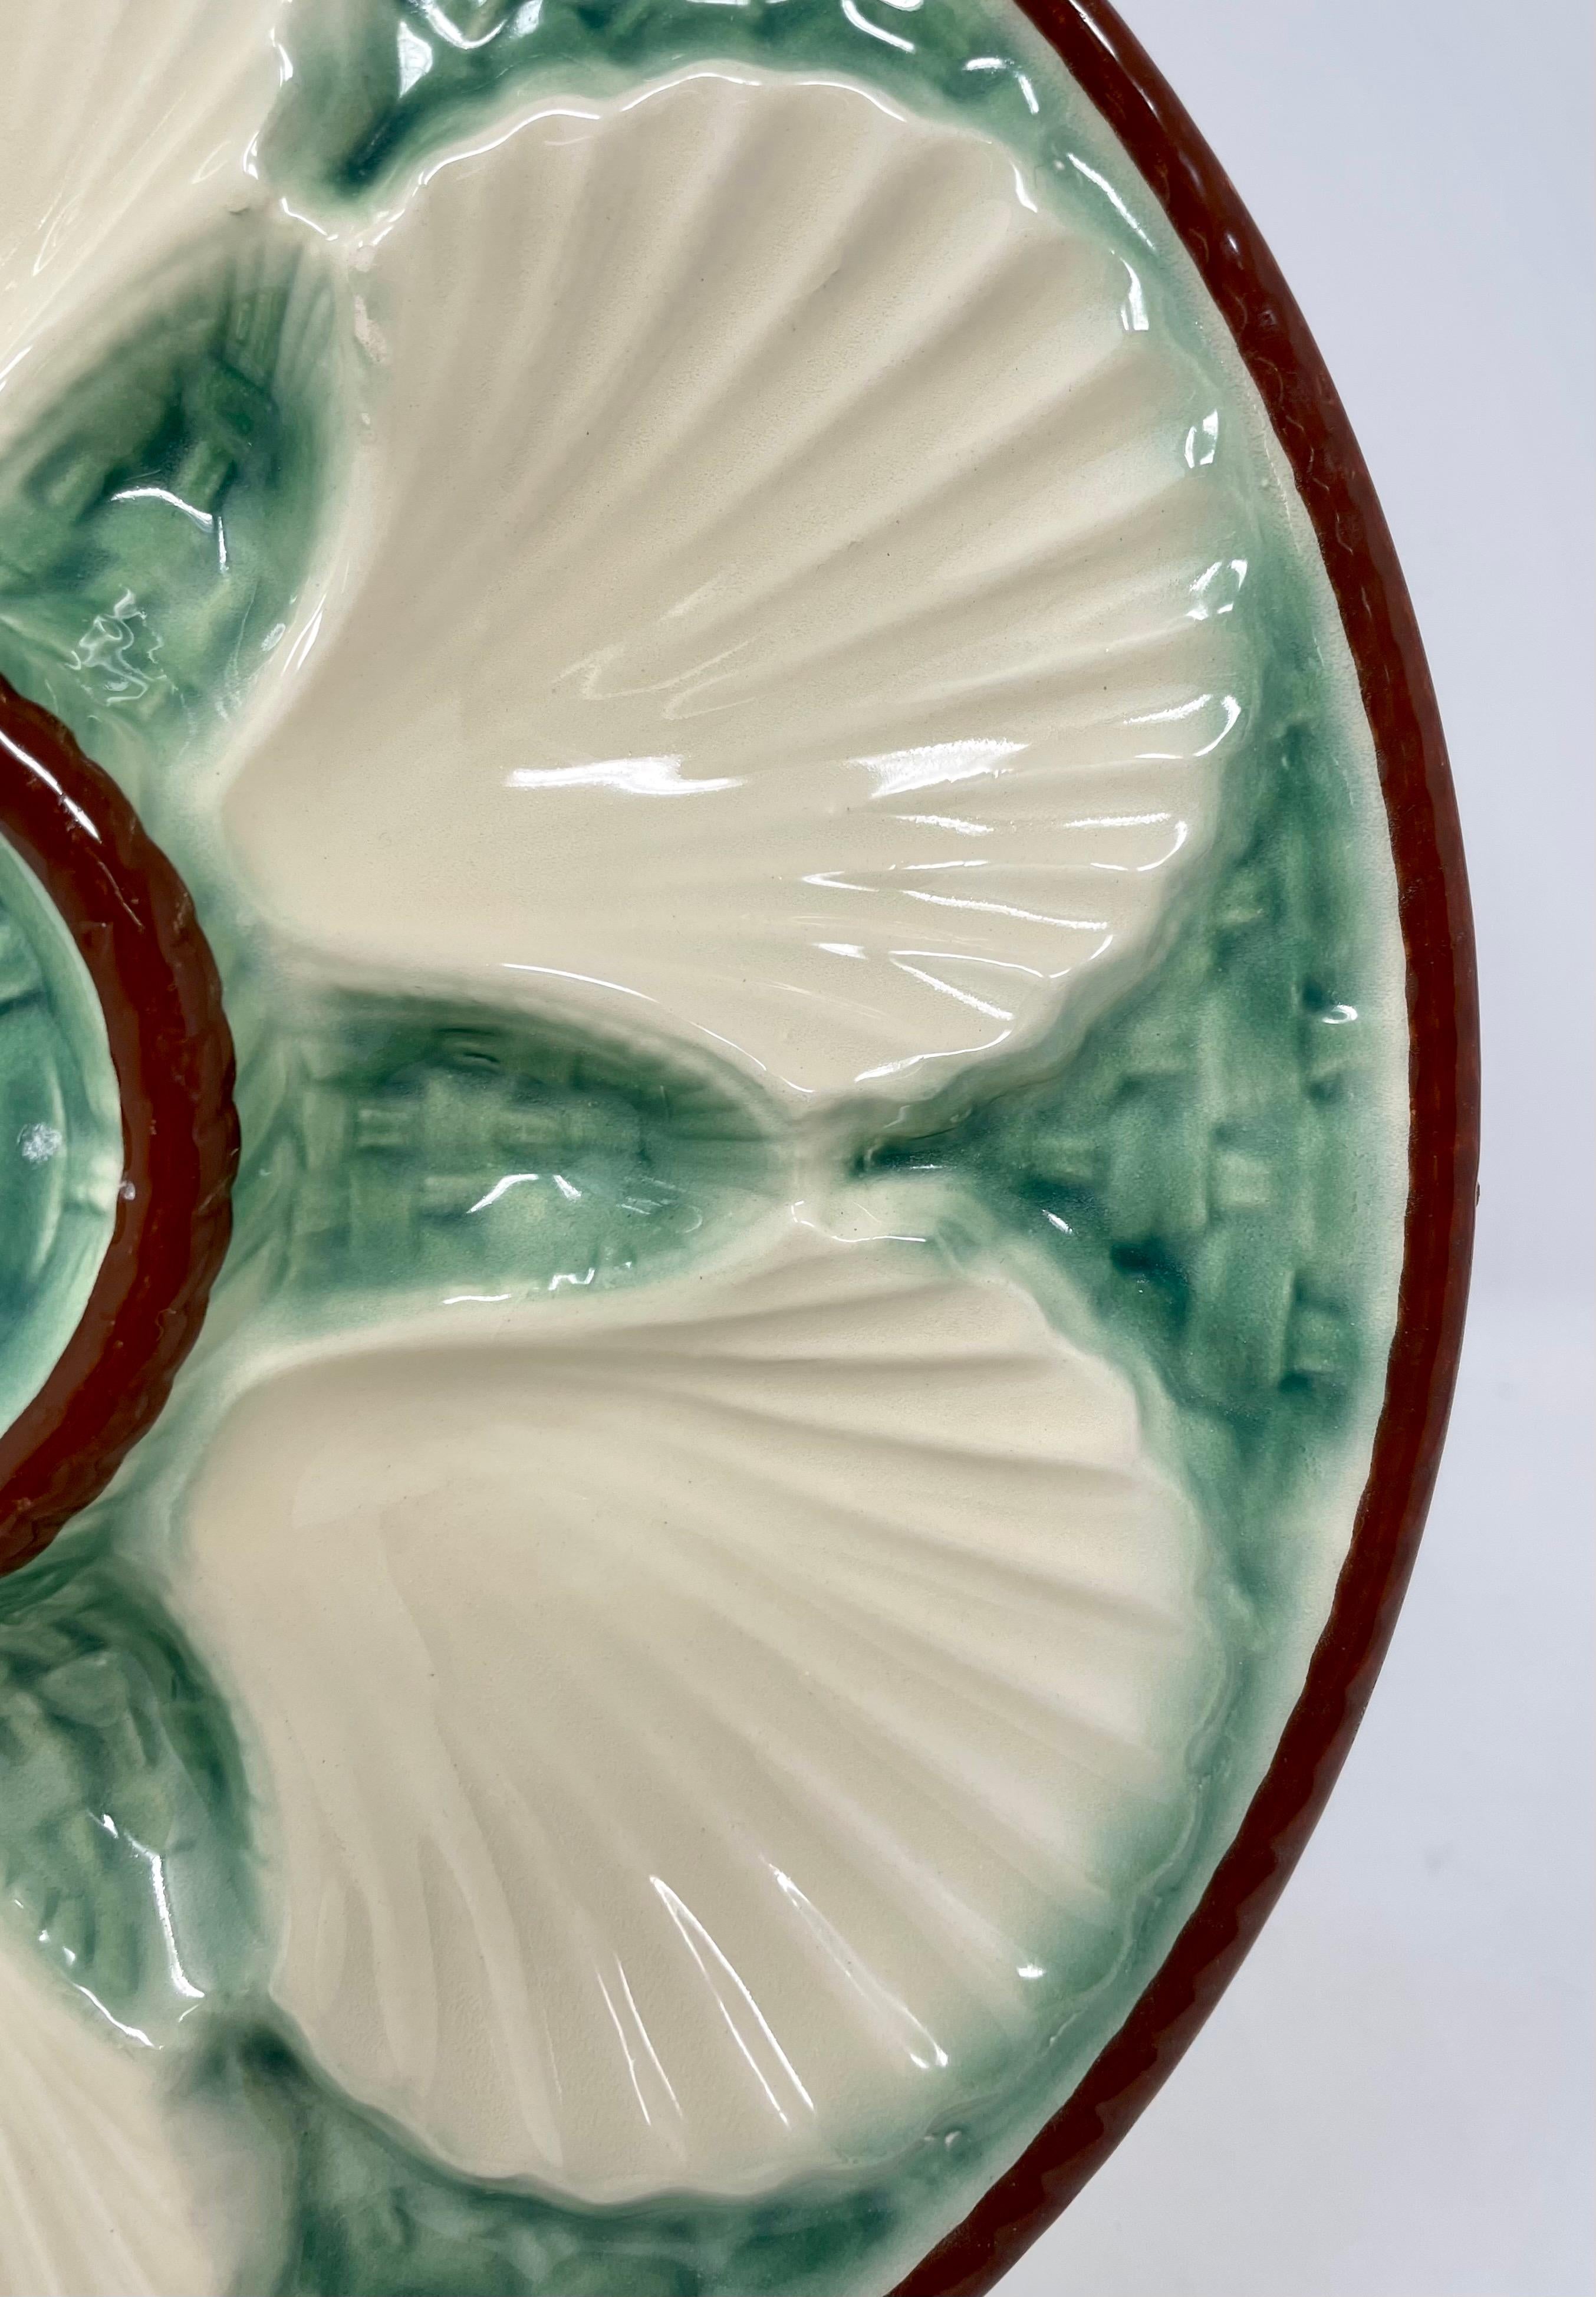 Mid-20th Century Estate French Faience Pottery Porcelain Oyster Plate by Longchamp, Circa 1930's